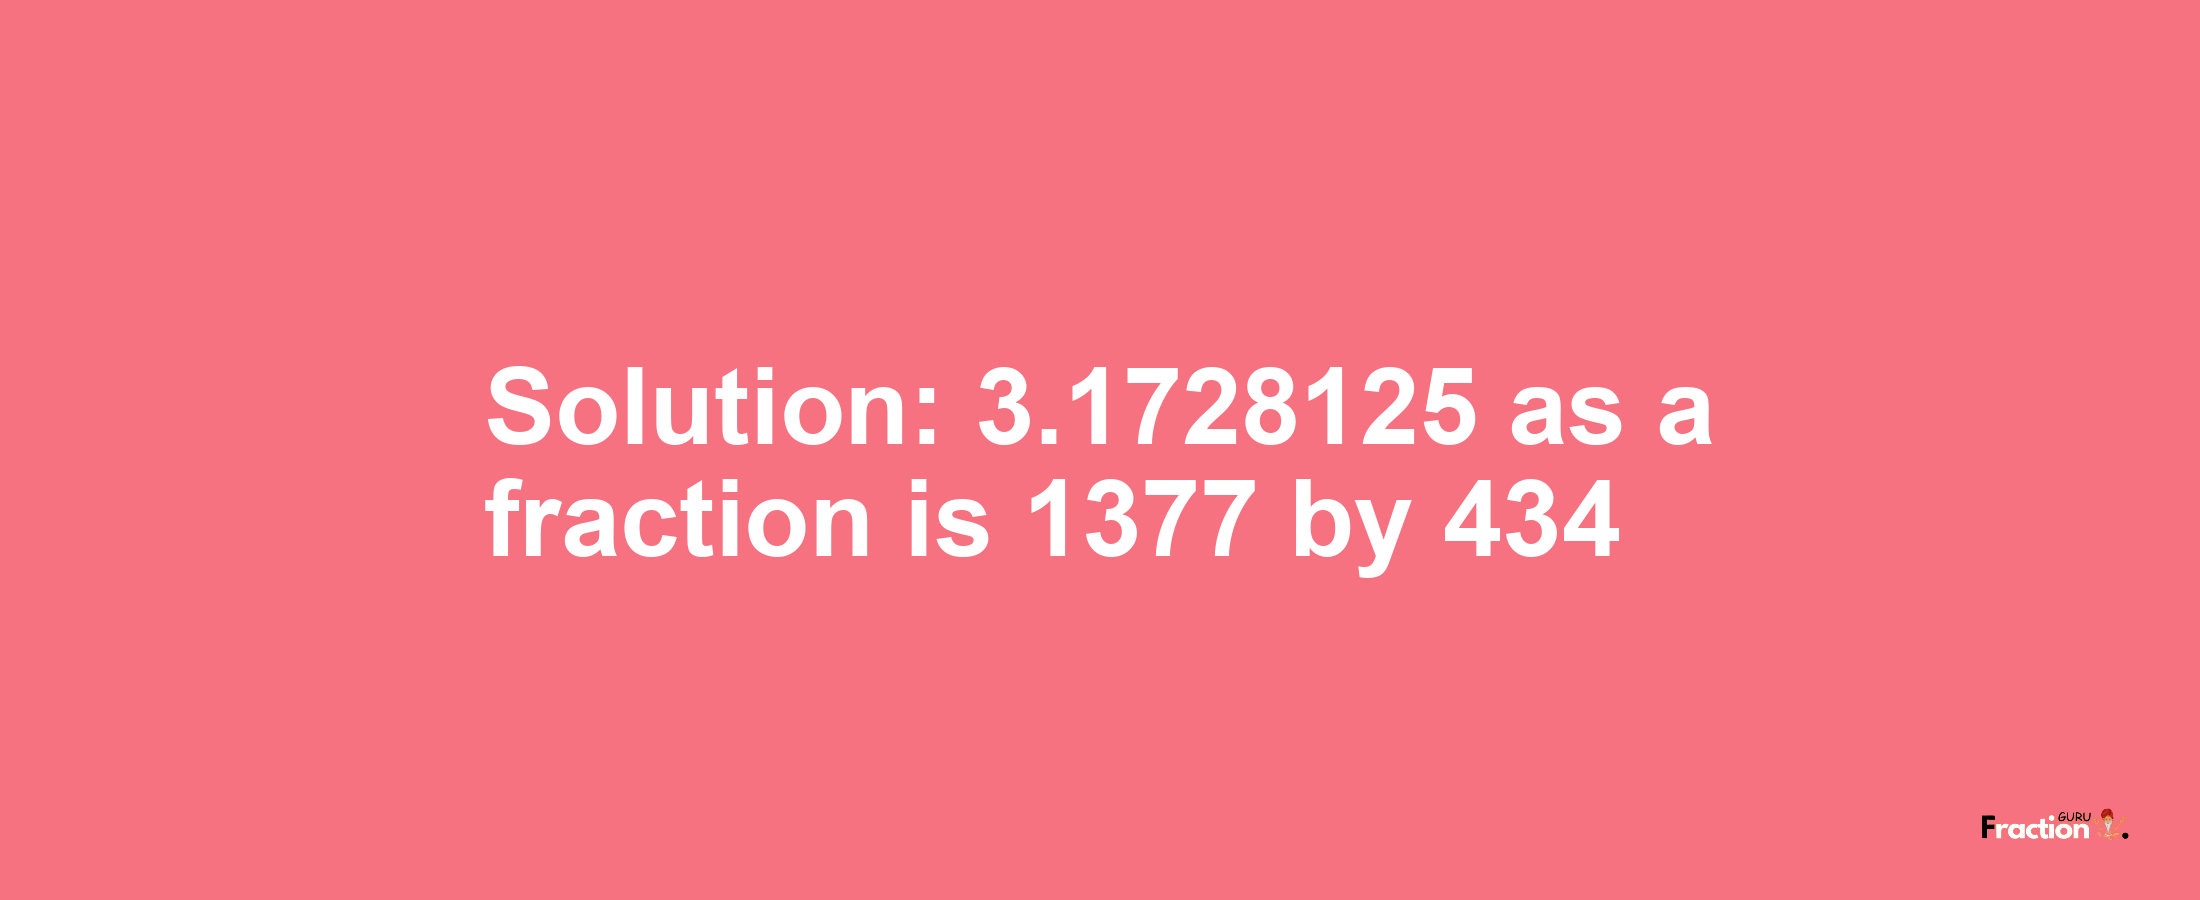 Solution:3.1728125 as a fraction is 1377/434